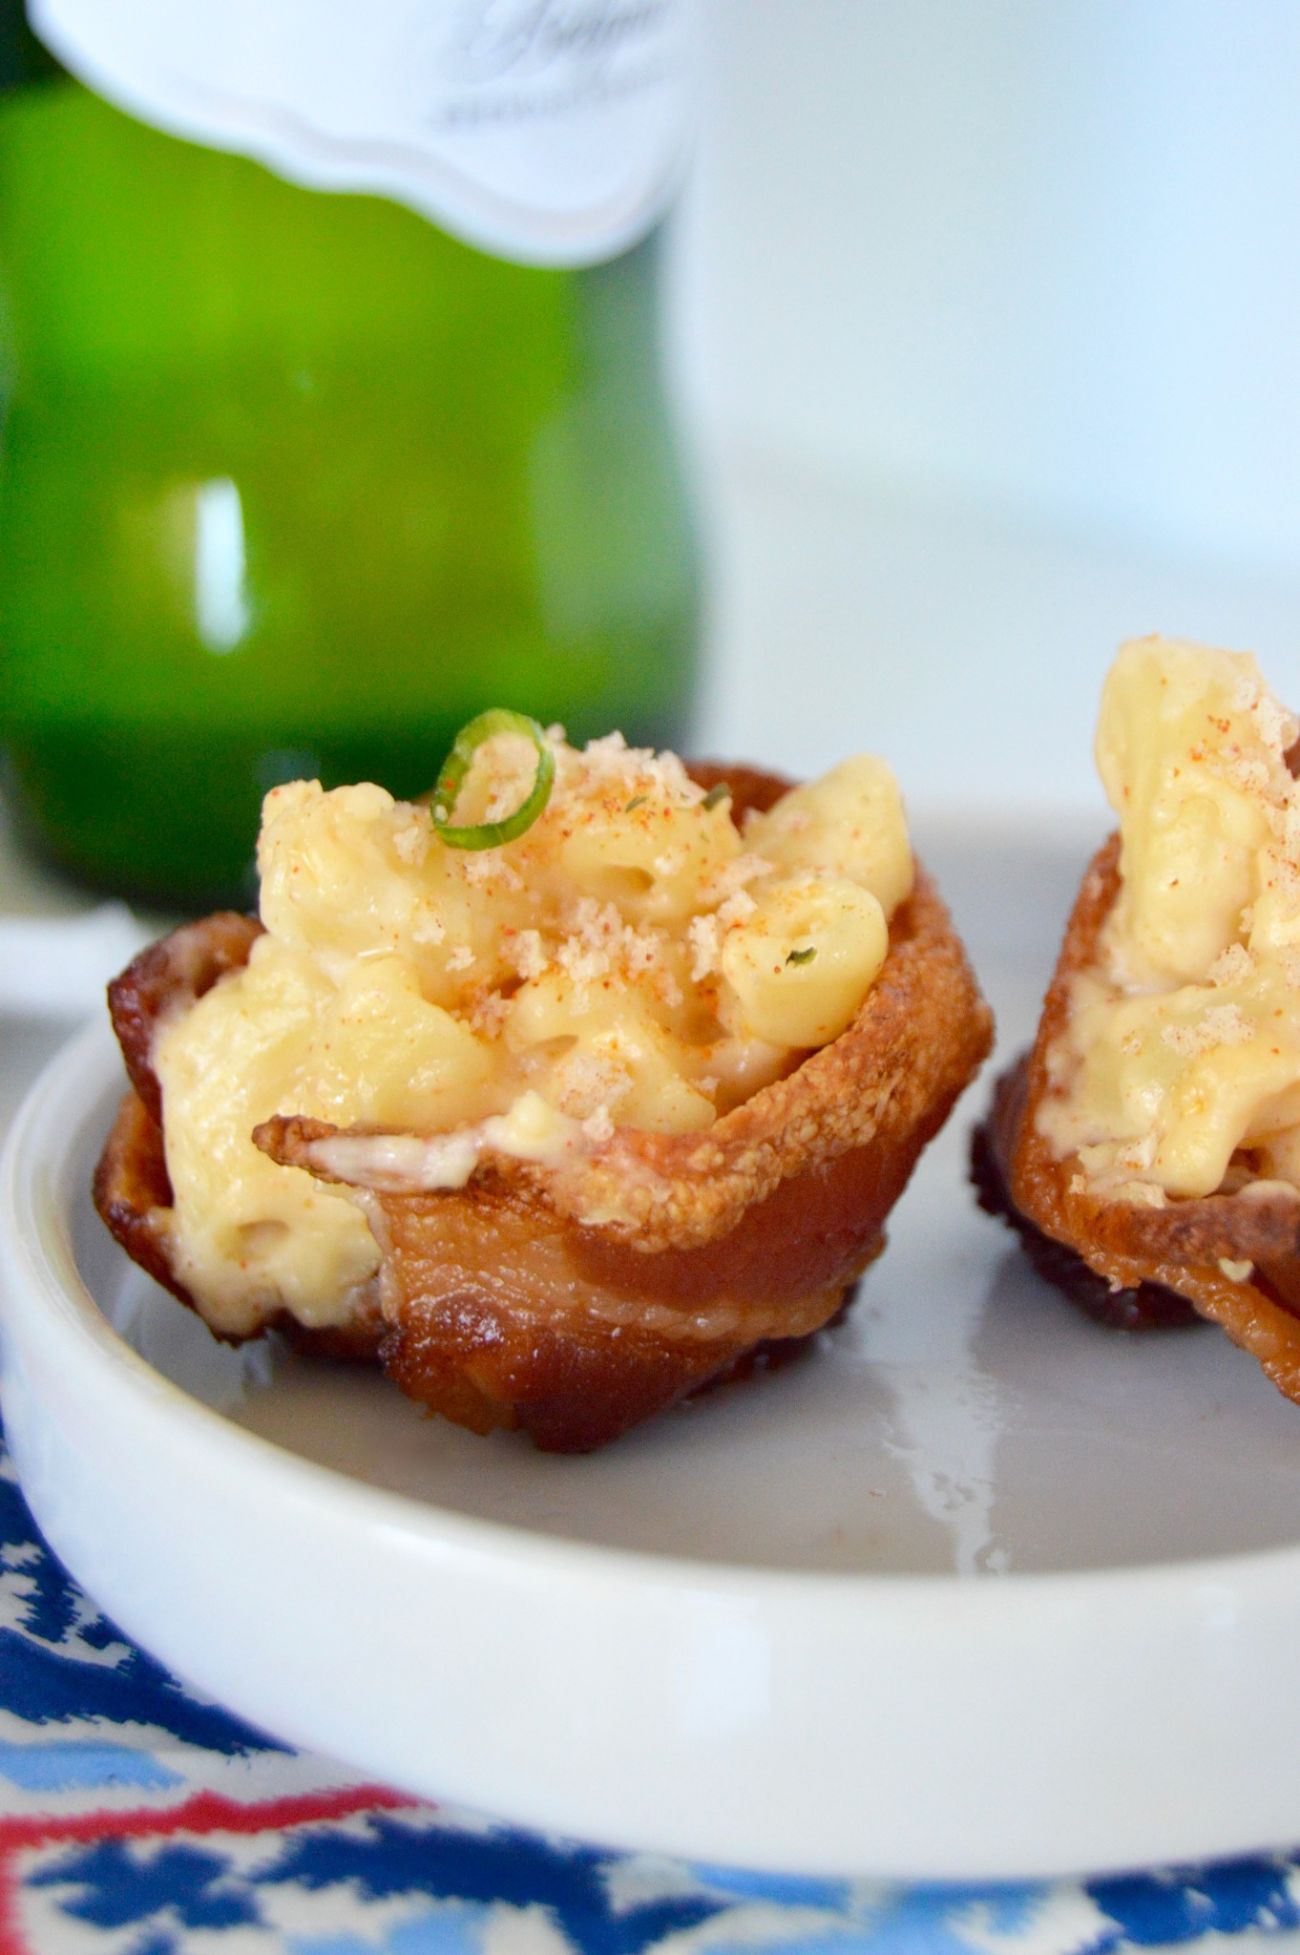 Small cups made of bacon stuffed with macaroni and cheese on a plate